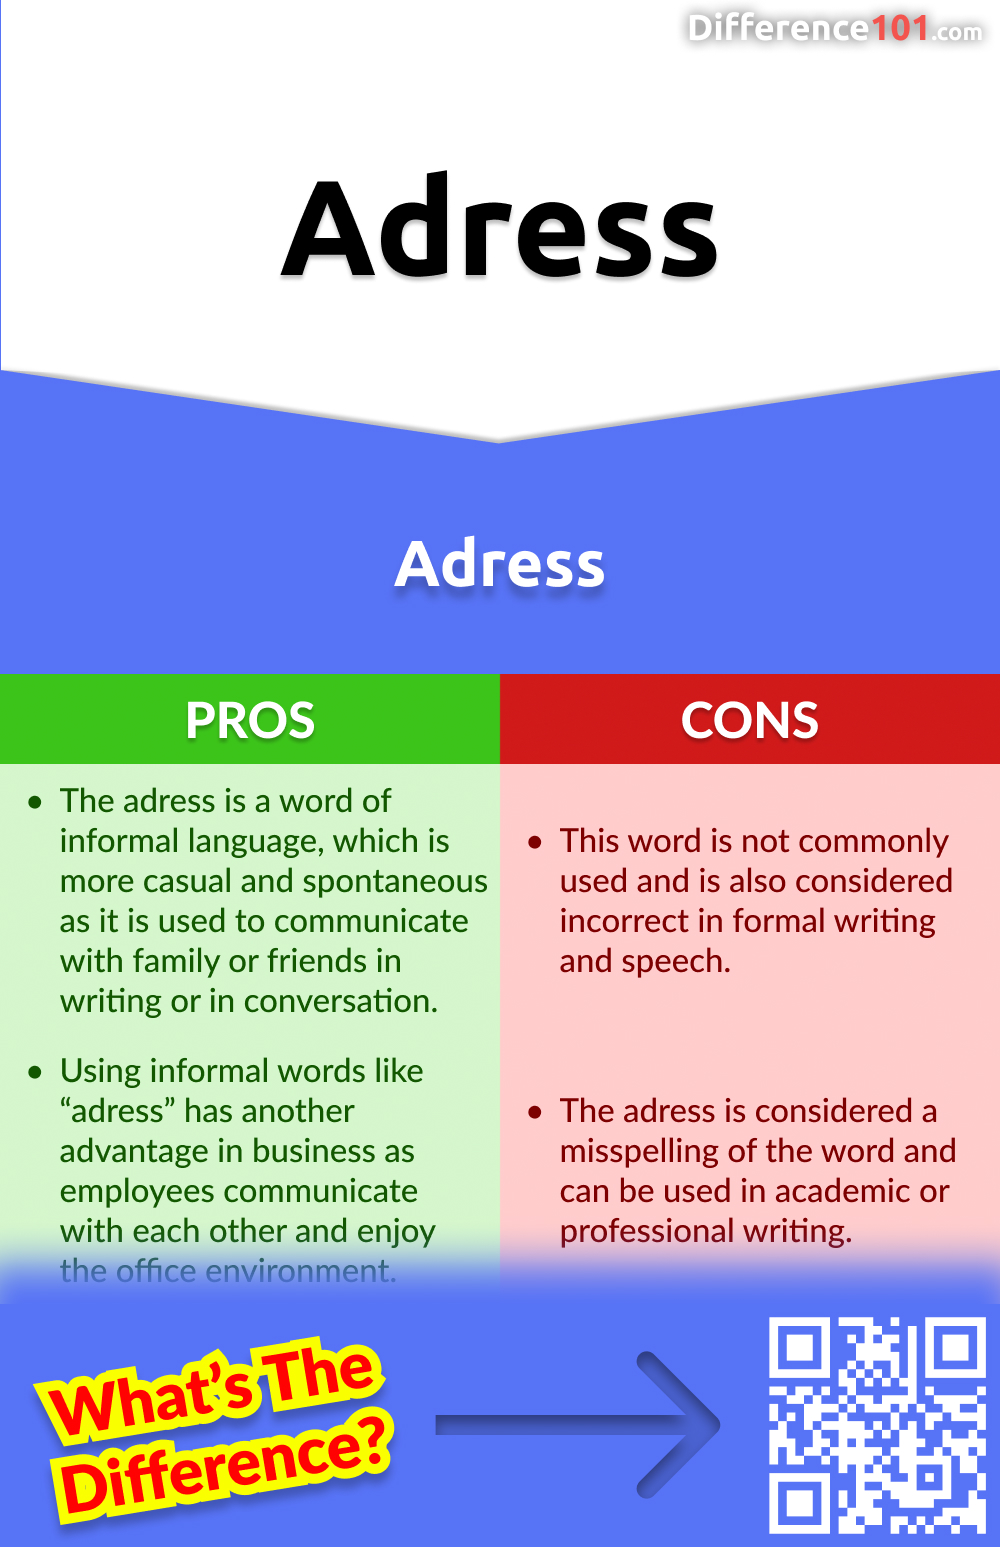 Adress Pros and Cons